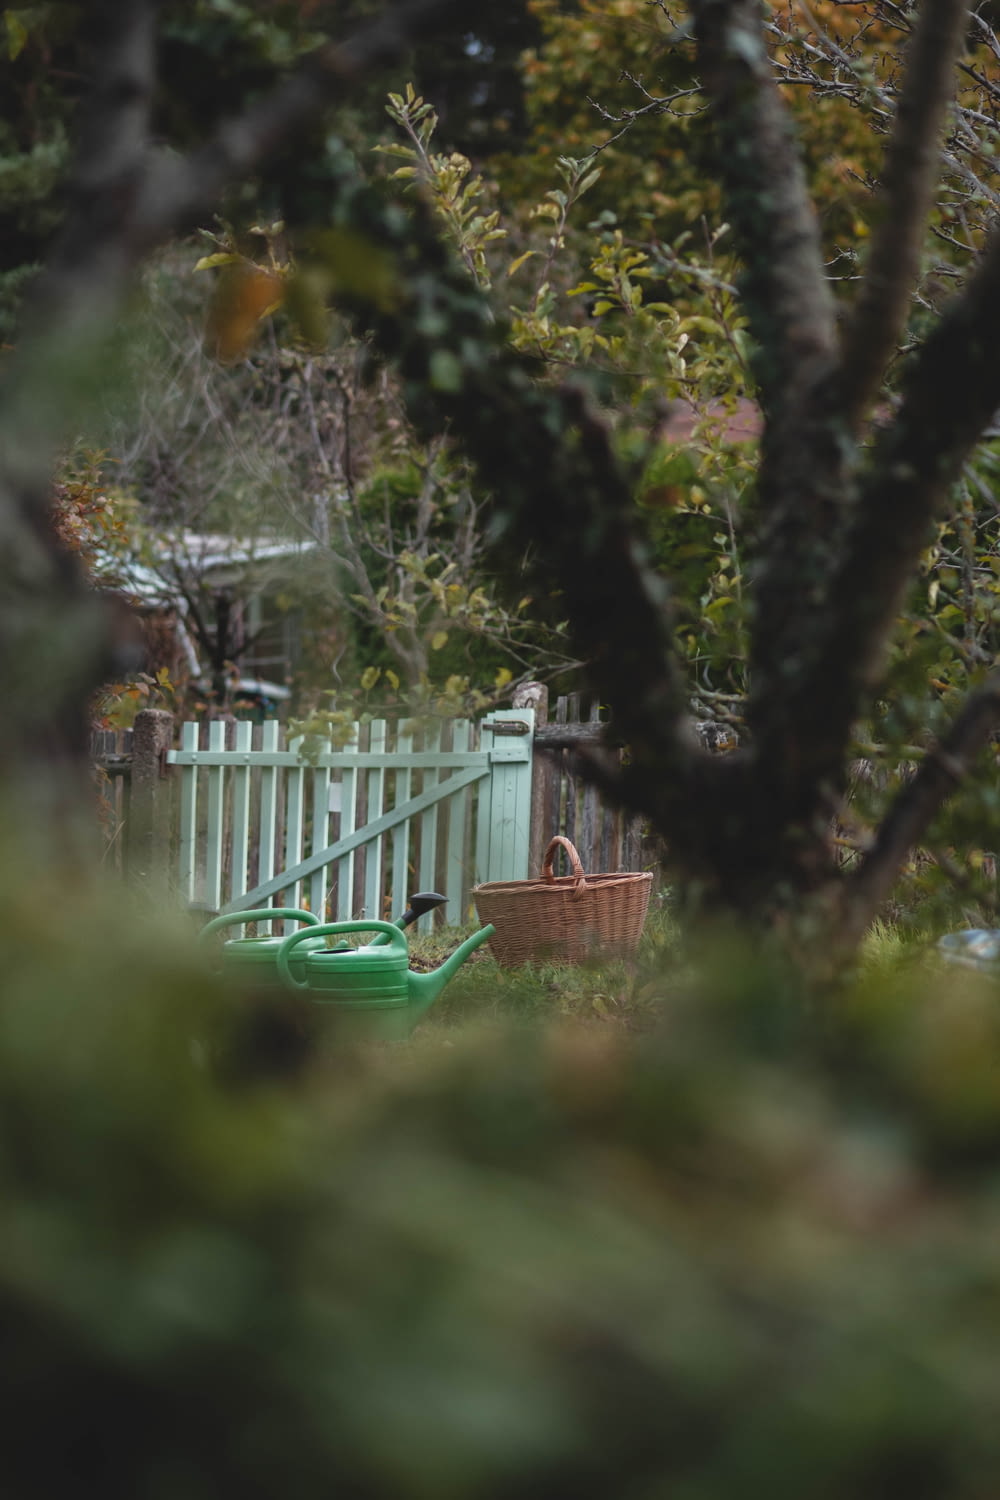 a green wheelbarrow sitting in the middle of a yard